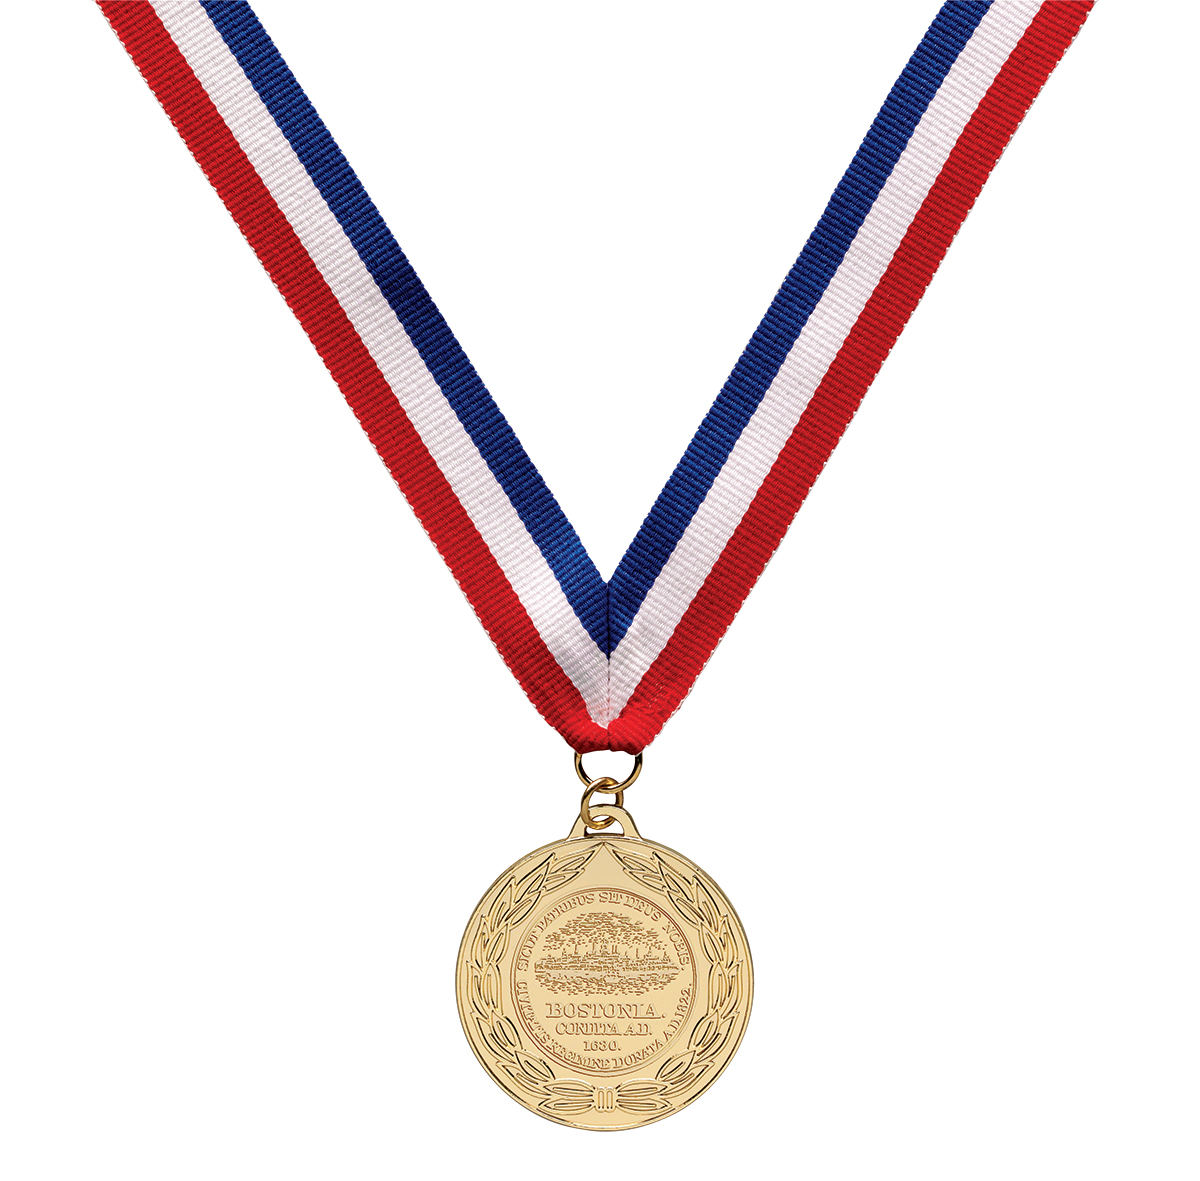 Gold Olympic medal on Ribbon with clipping path